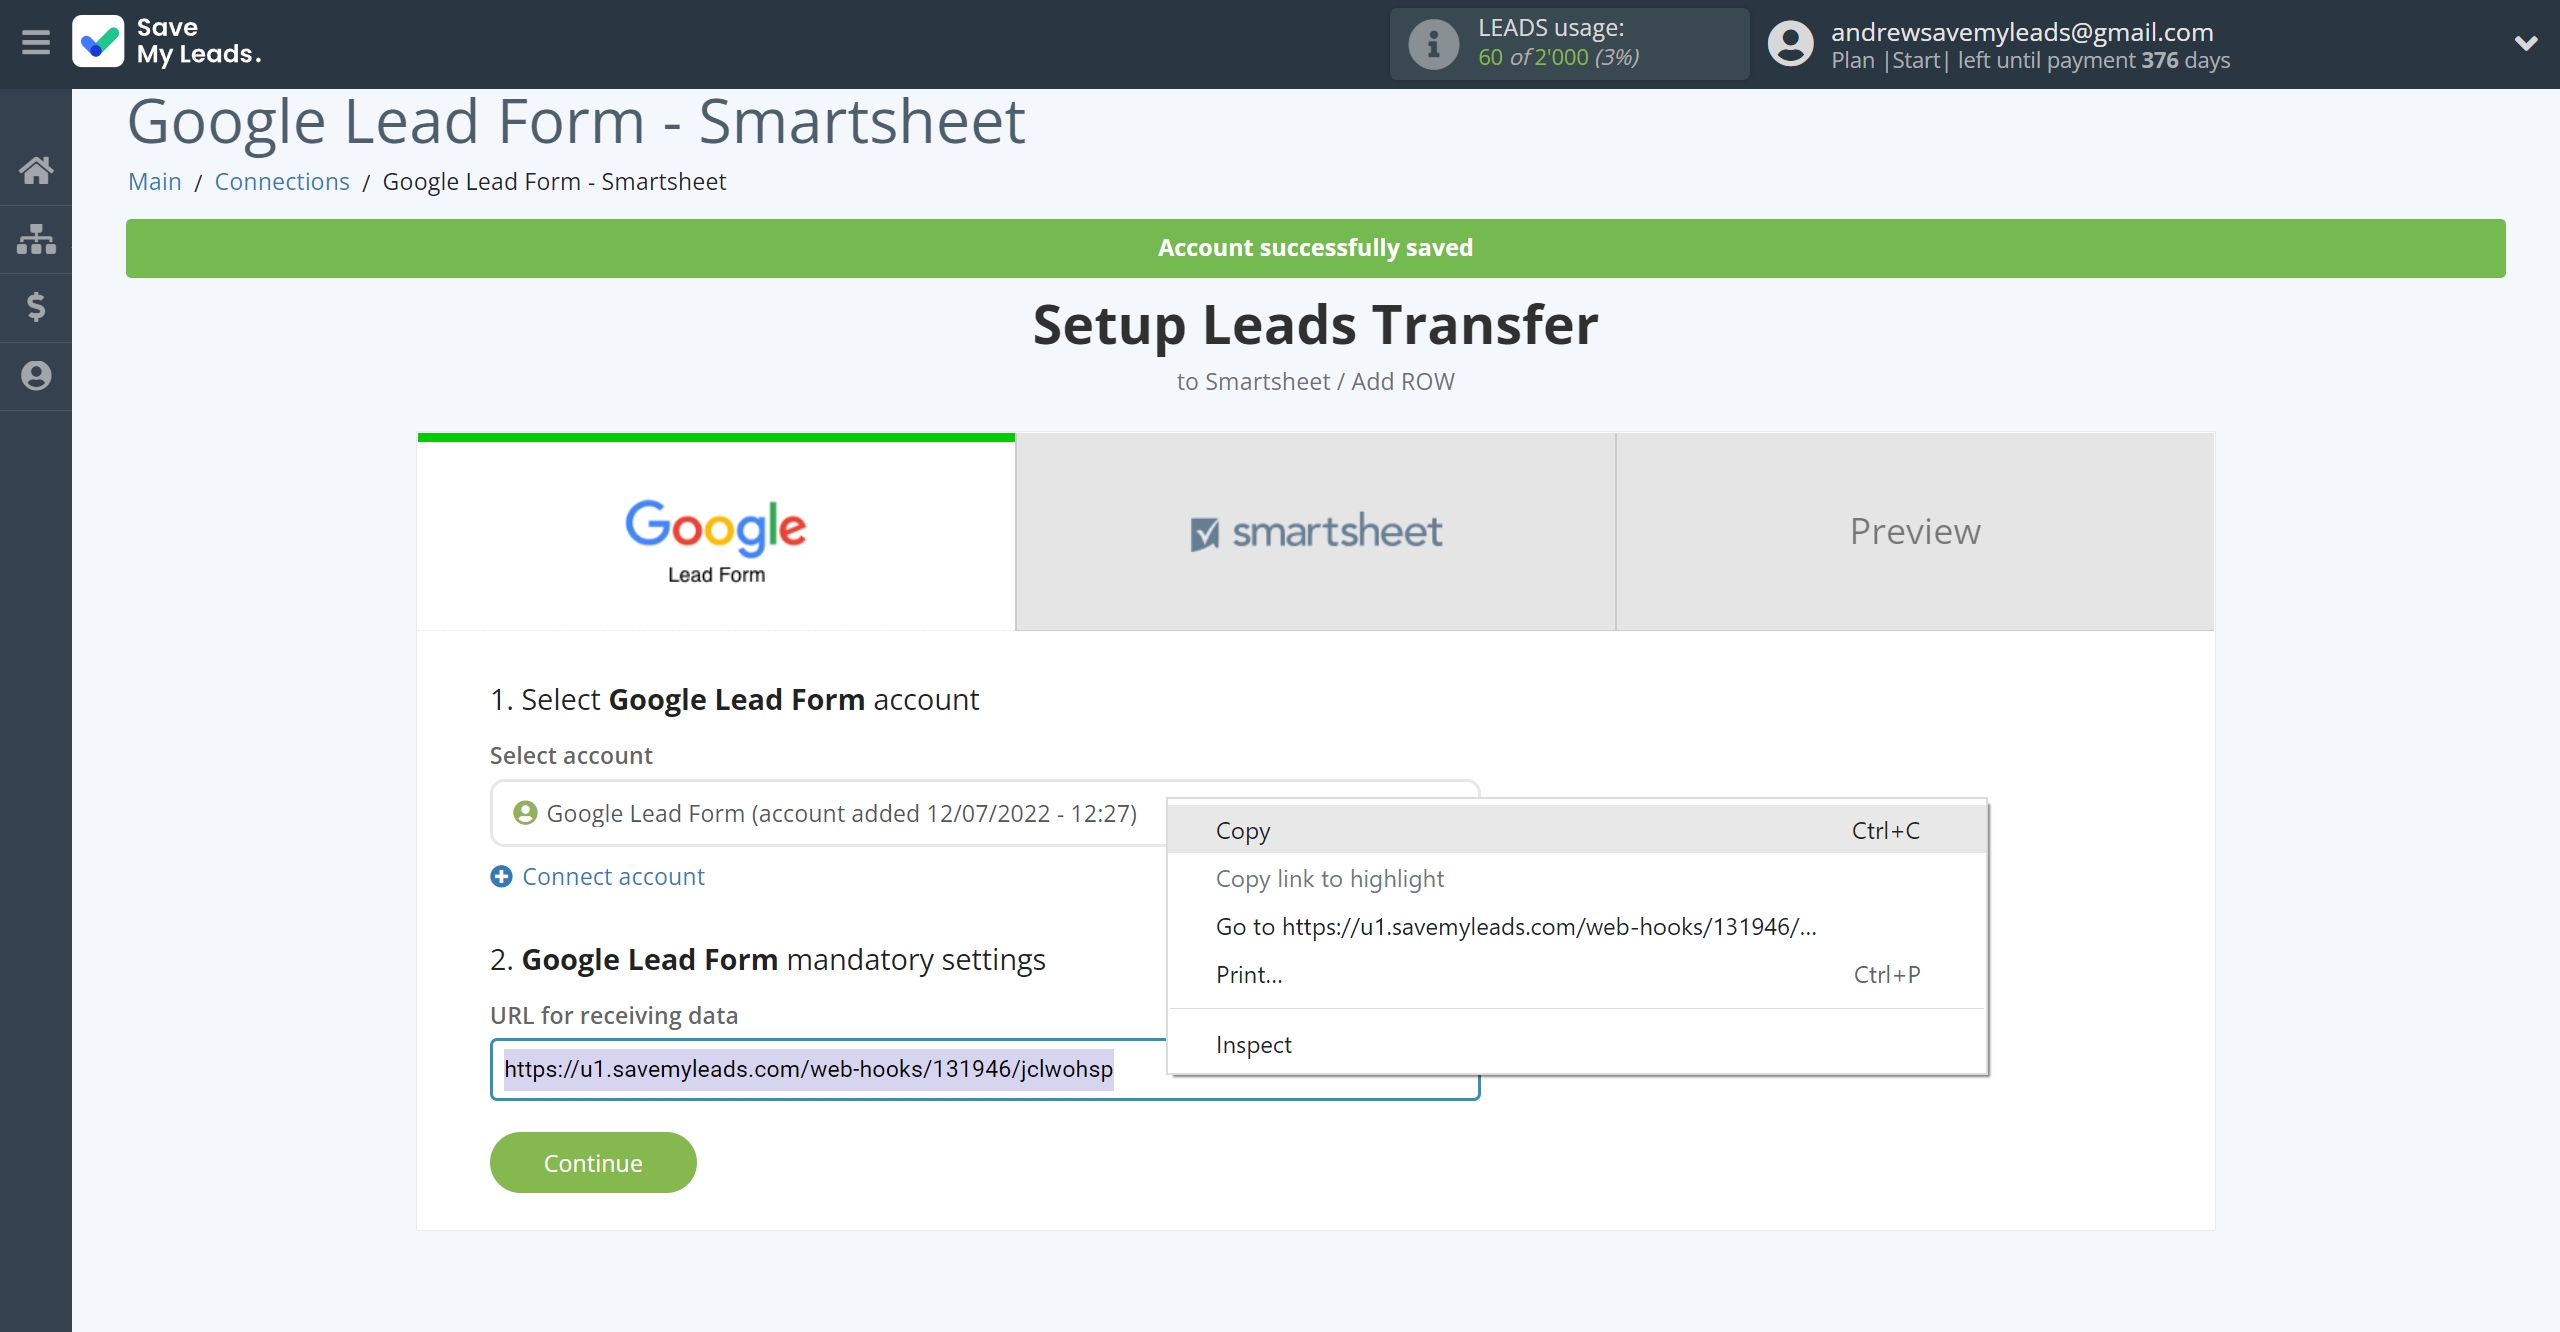 How to Connect Google Lead Form with Smartsheet | Data Source account connection